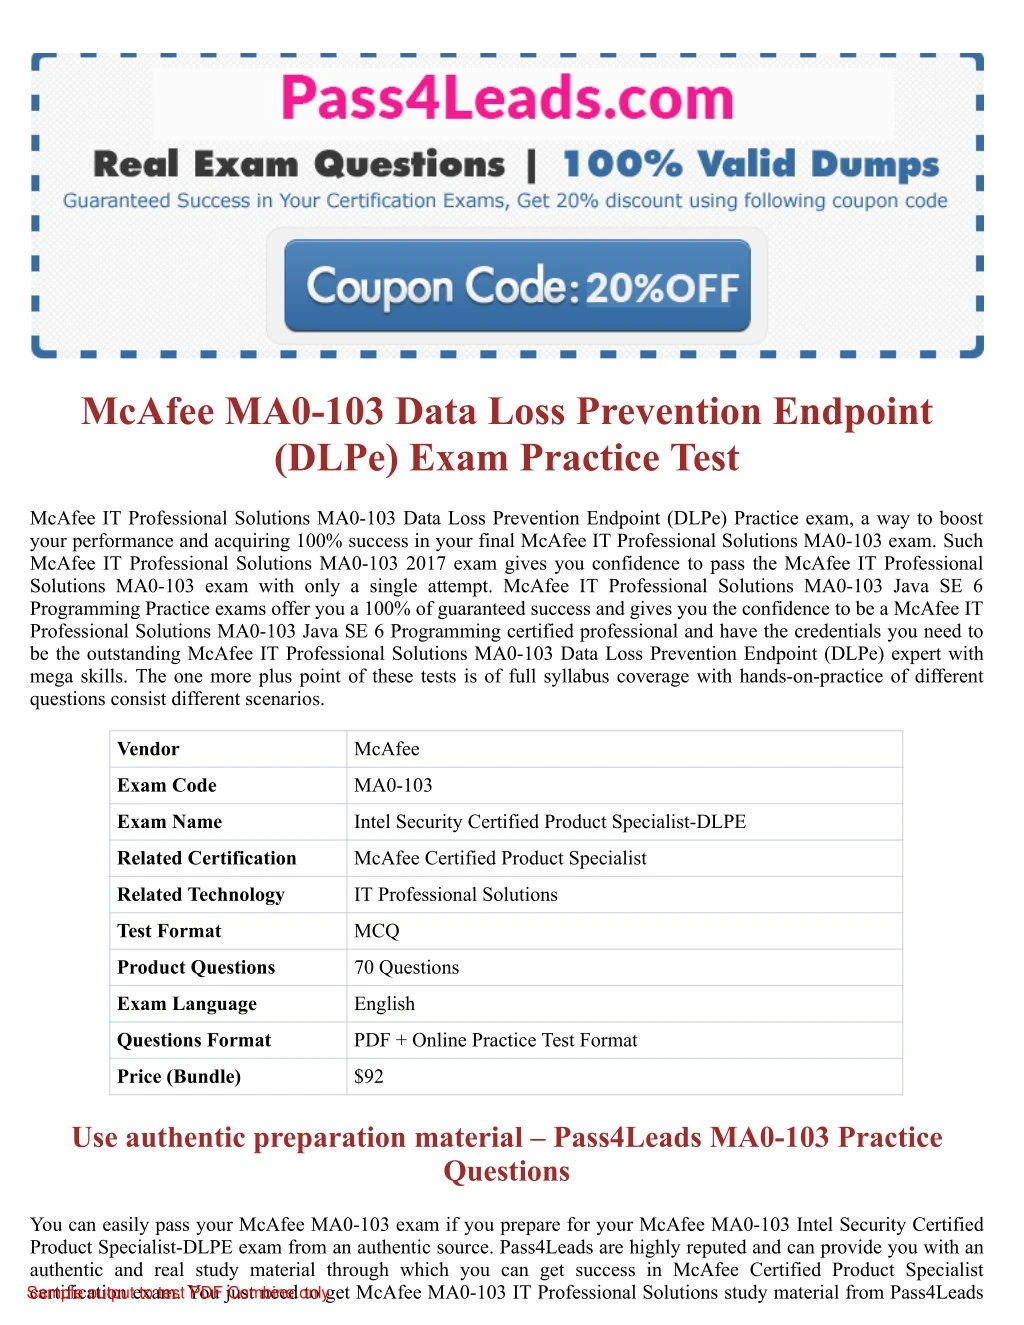 mcafee ma0 103 data loss prevention endpoint dlpe